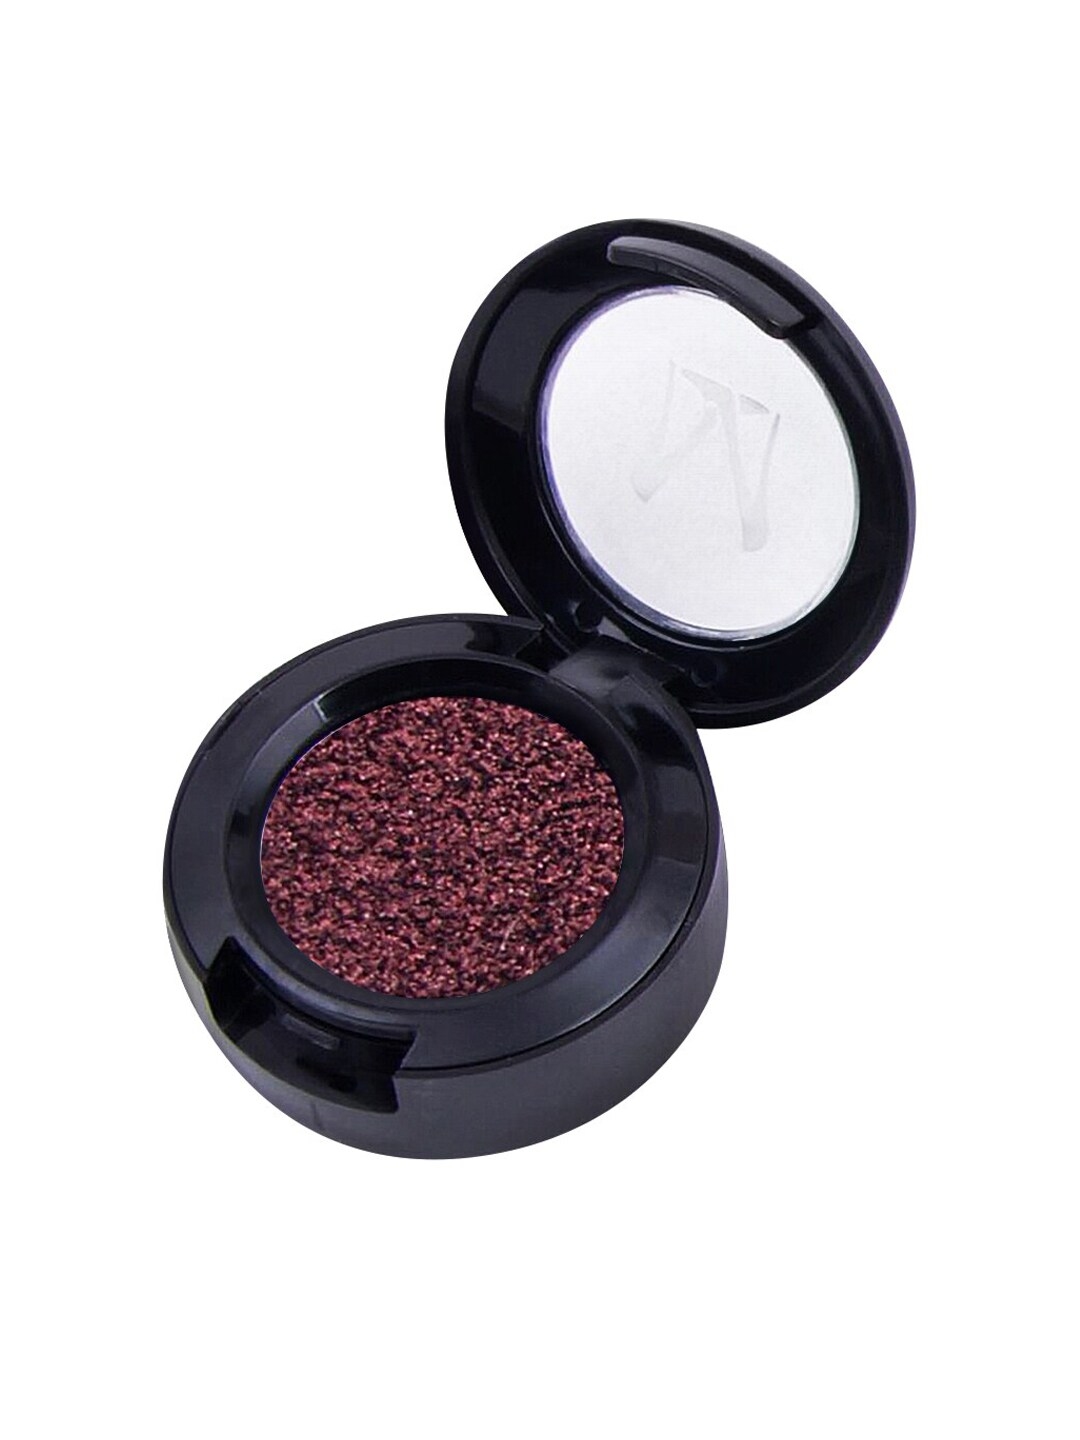 MISS ROSE Brown Single Color Shinning Glitter Glow Pigment Eyeshadow